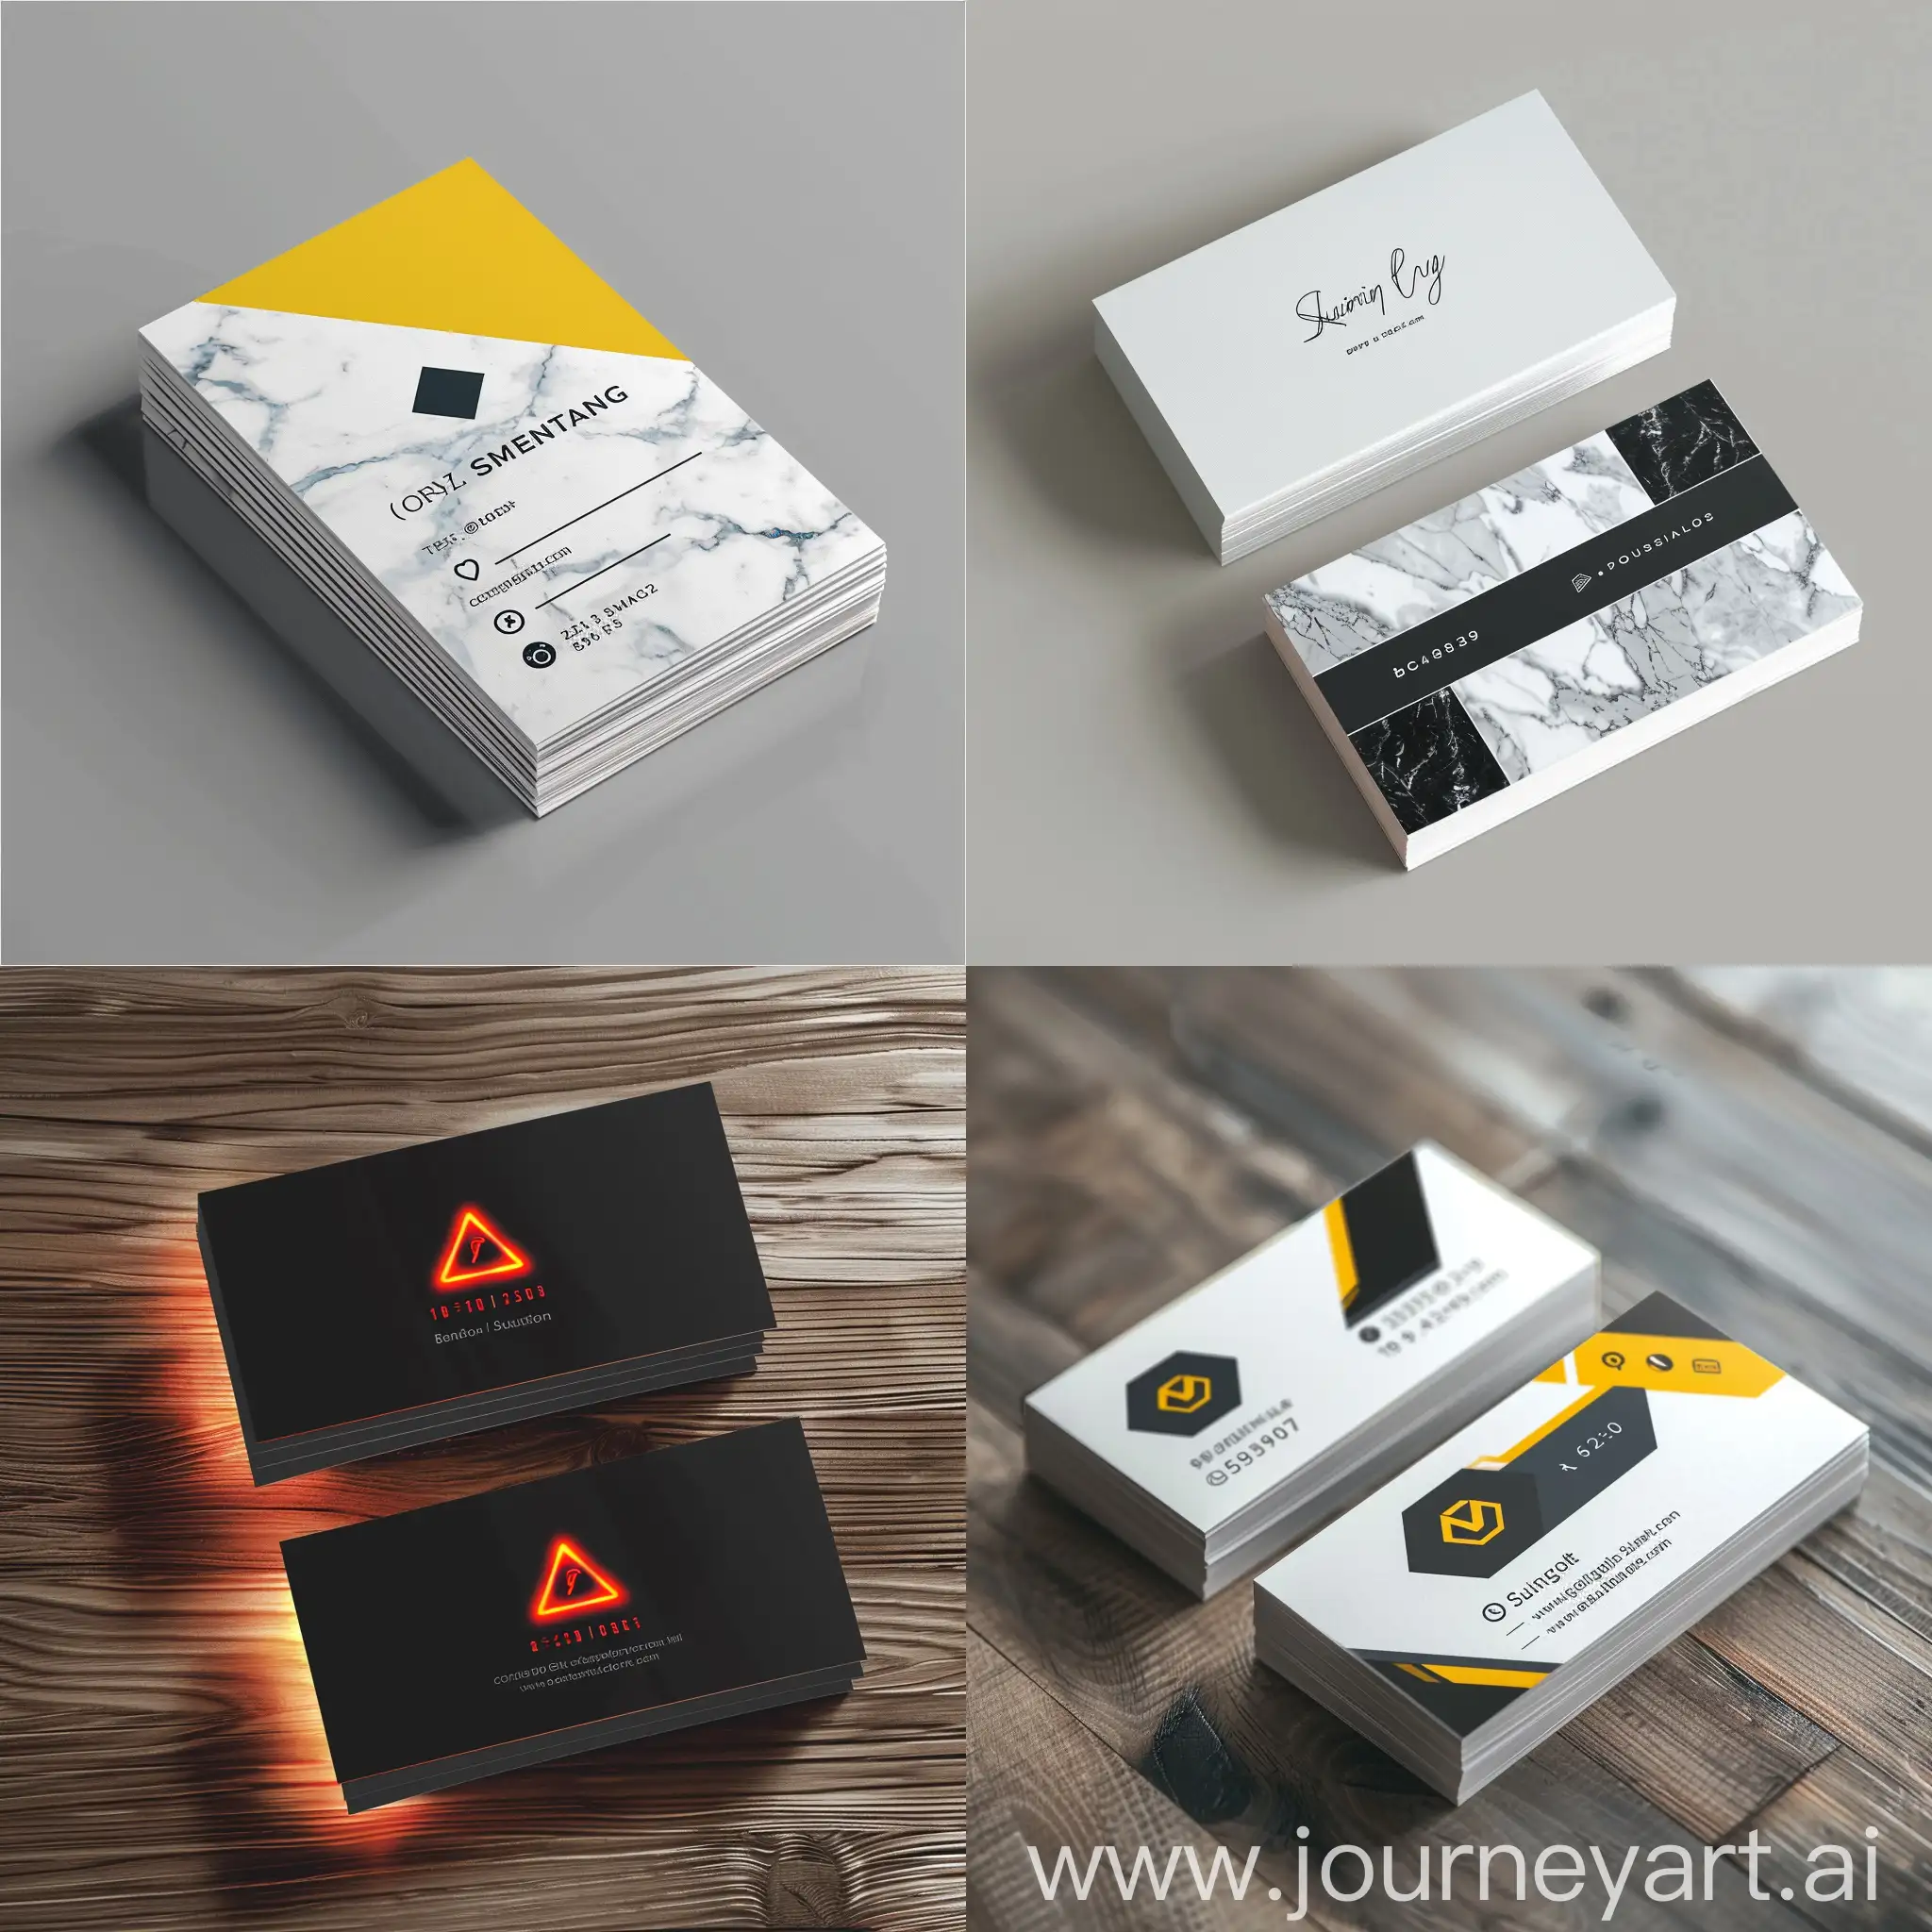 Advertising-Agency-Business-Card-Design-with-Modern-Minimalist-Aesthetics